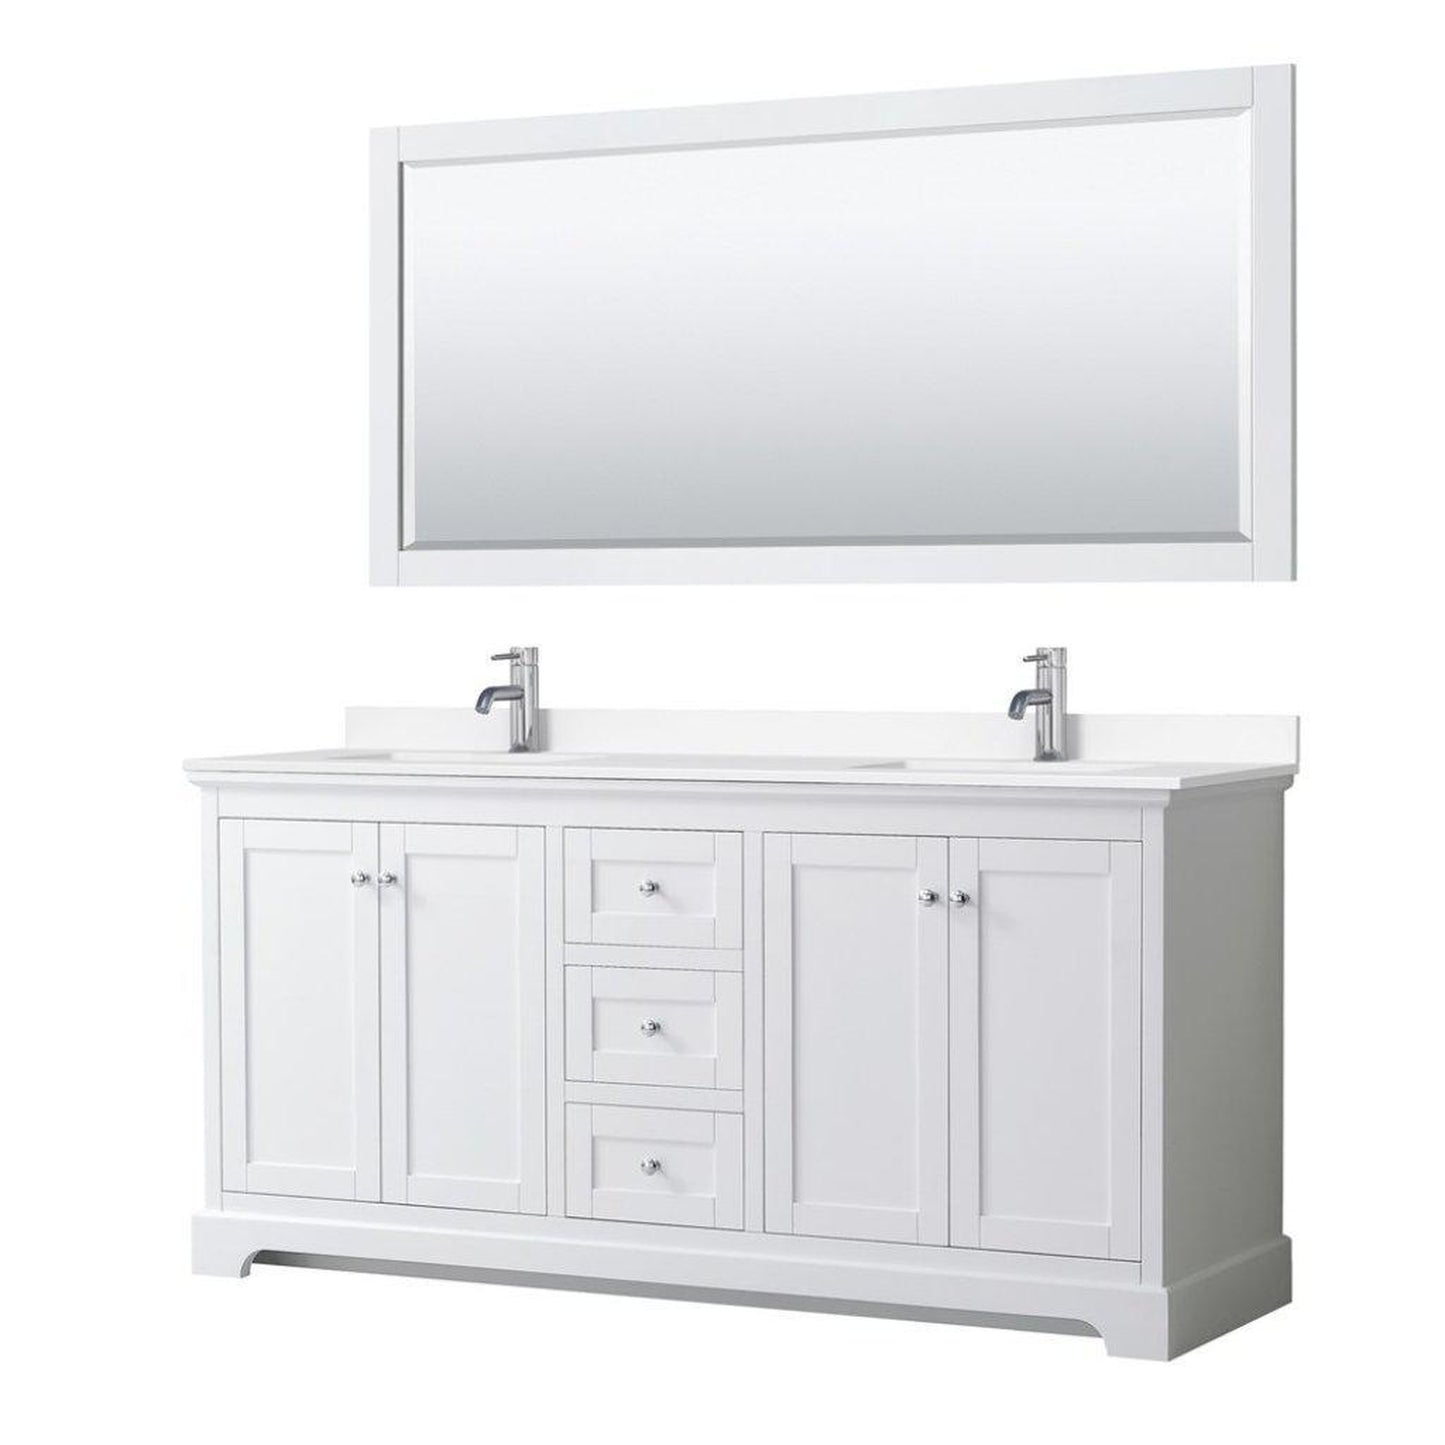 Wyndham Collection Avery 72" White Double Bathroom Vanity Set, White Cultured Marble Countertop With 1-Hole Faucet, Square Sink, 70" Mirror, Polished Chrome Trims